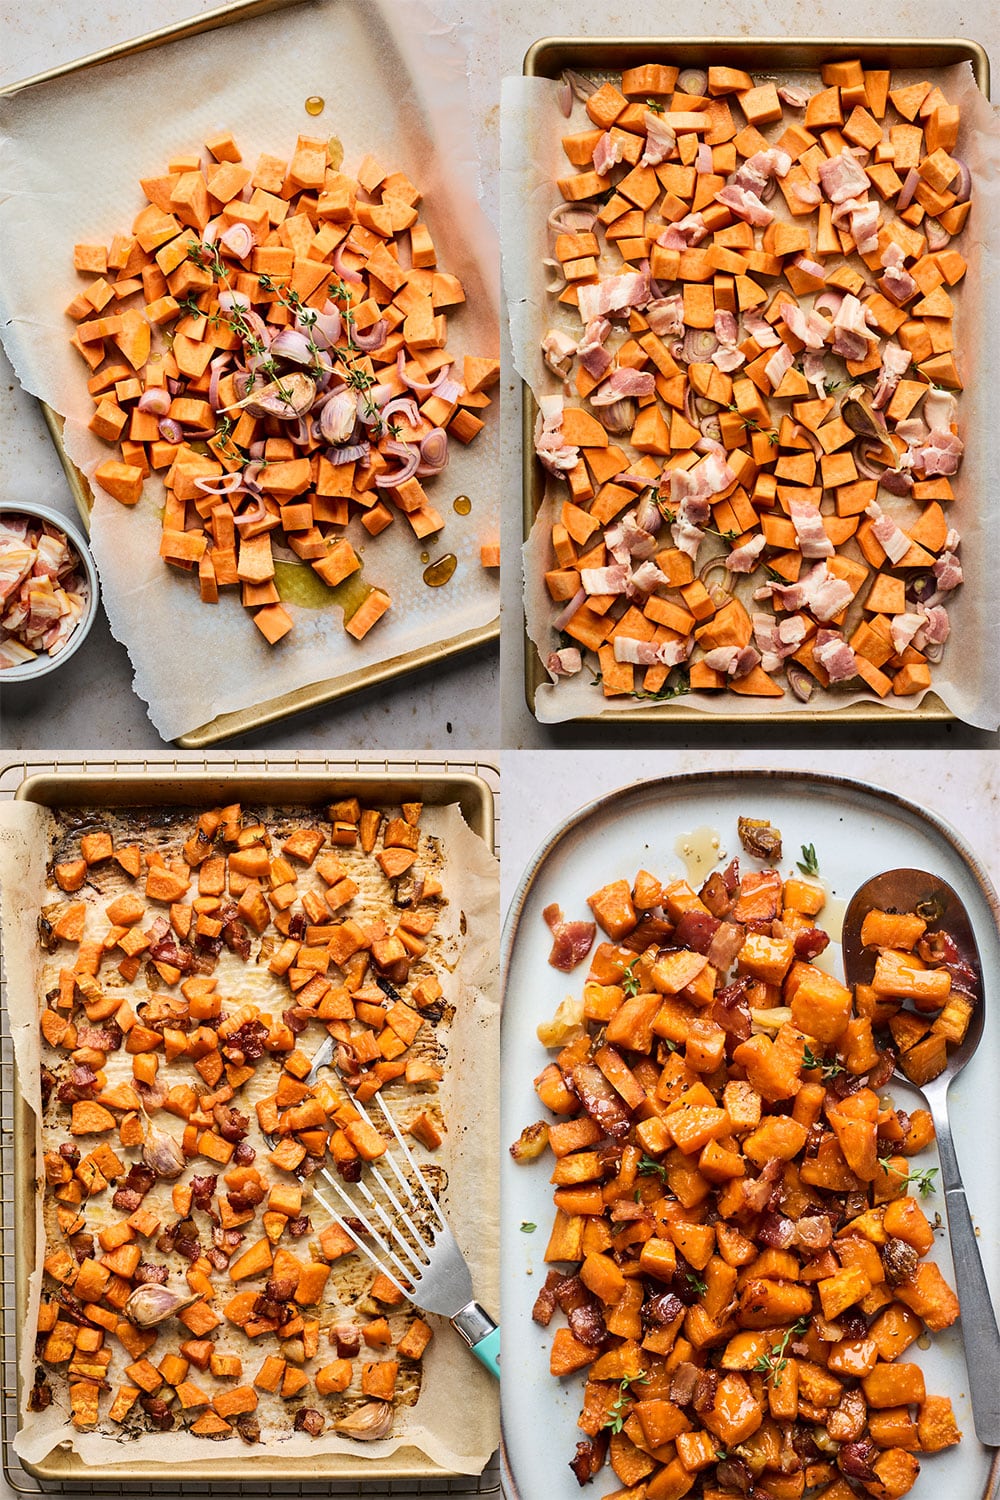 Roasted Sweet Potatoes With Bacon